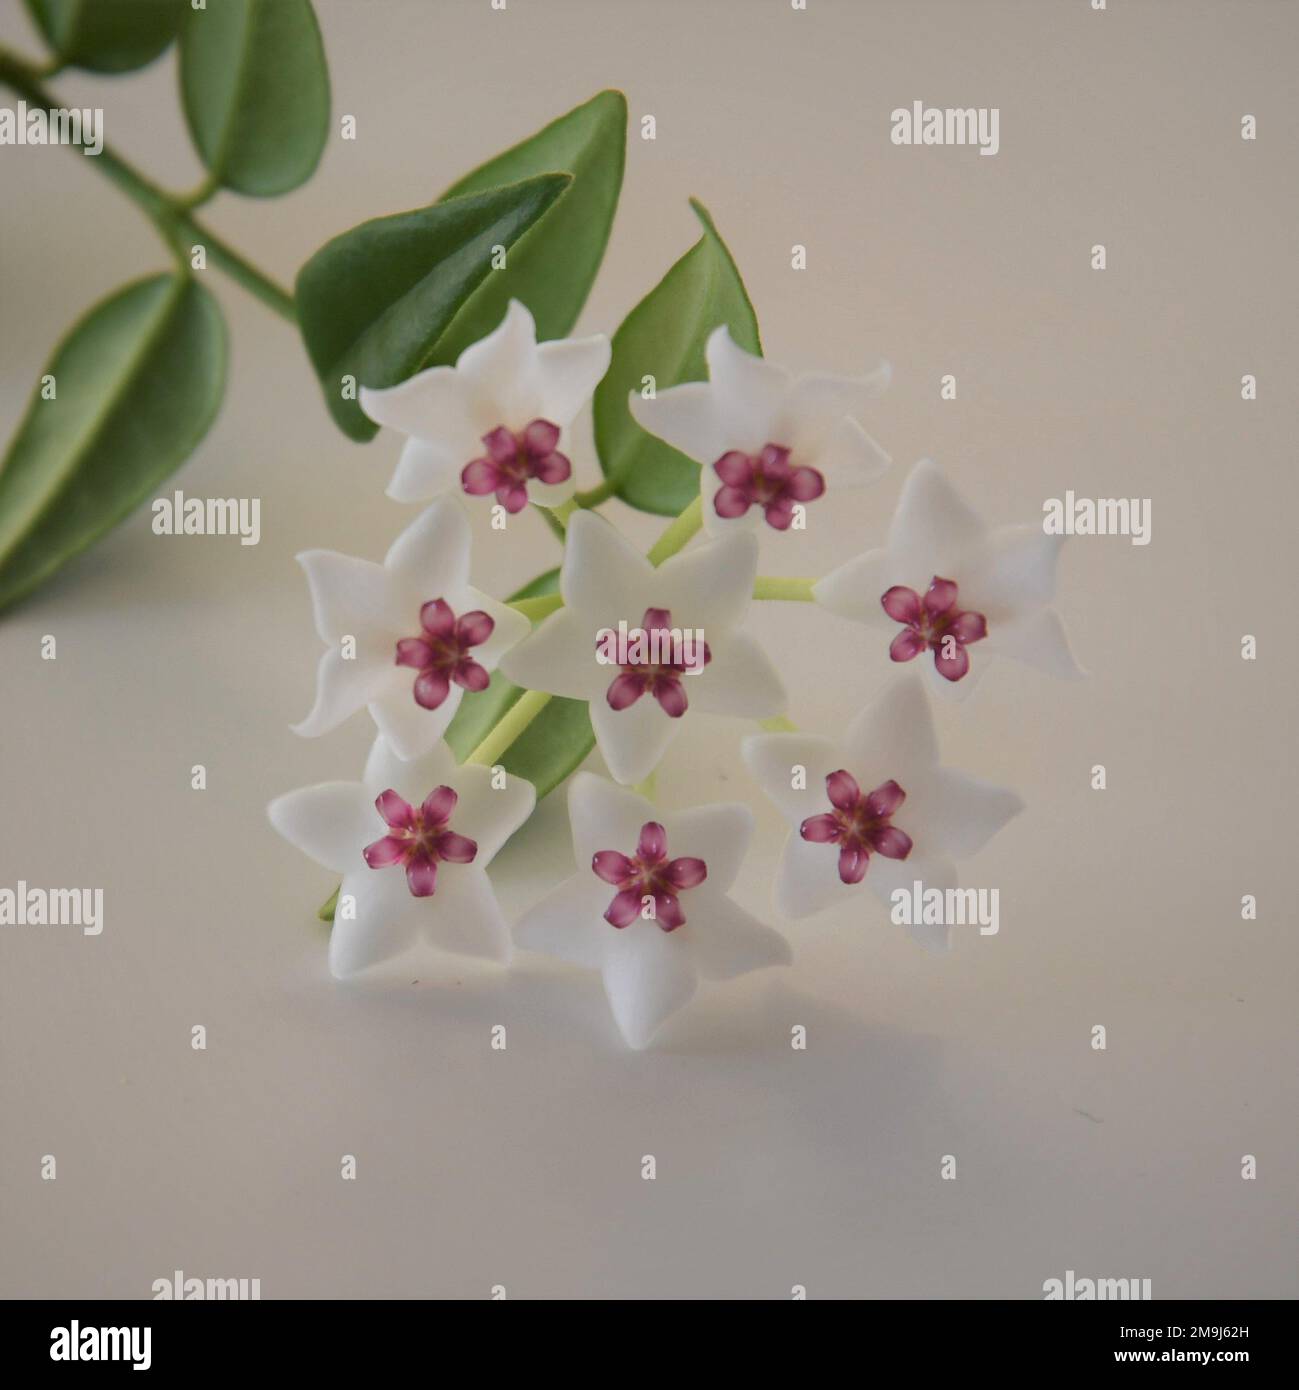 Hoya bella bloom, white and pink purple flower on a green vine. Close up on a white background. Stock Photo